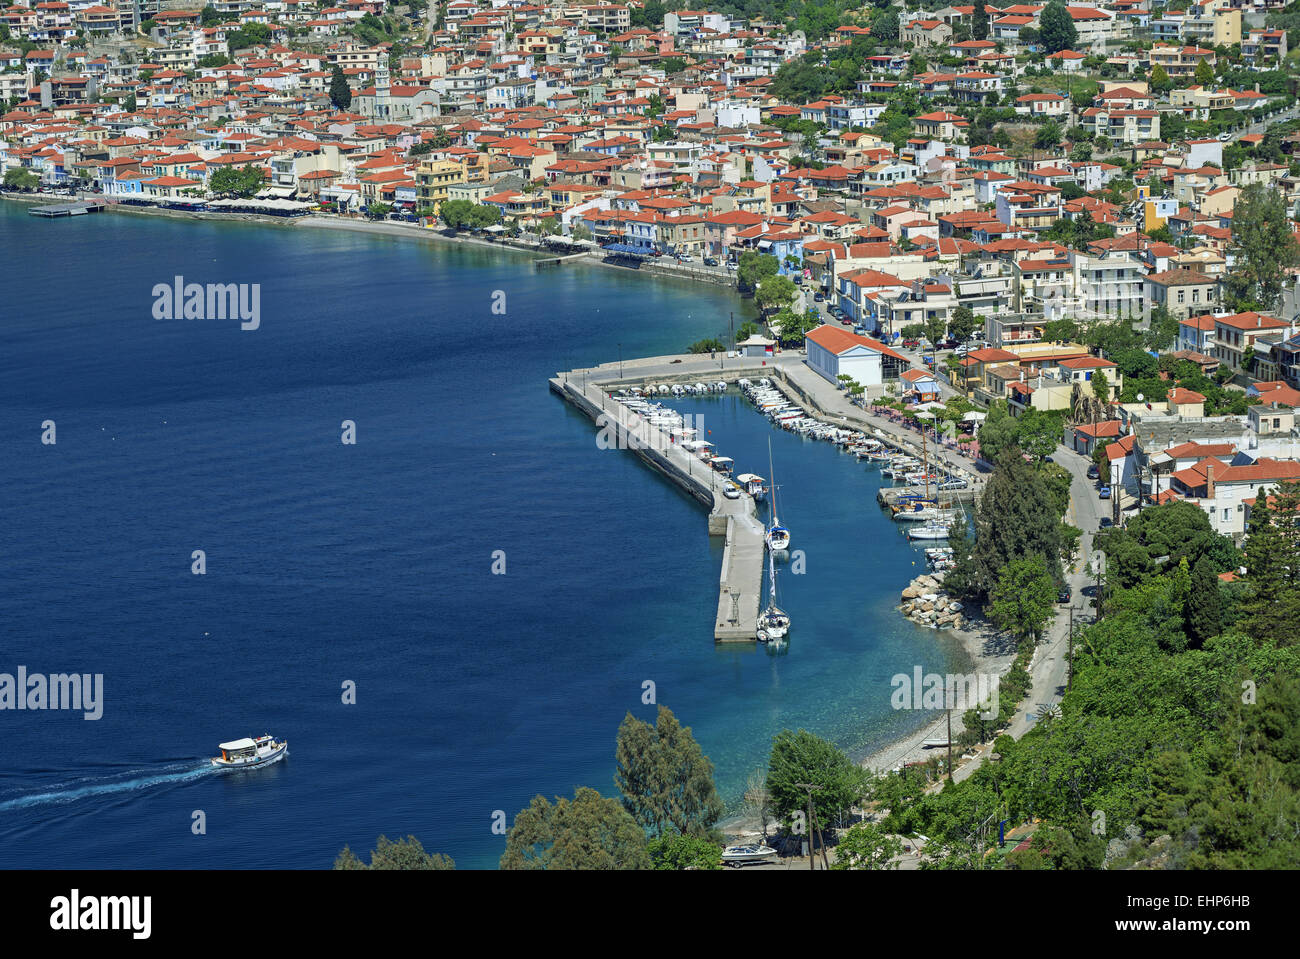 View from above of Limni (Lake), a picturesque town of Evia island, Aegean sea, Greece Stock Photo